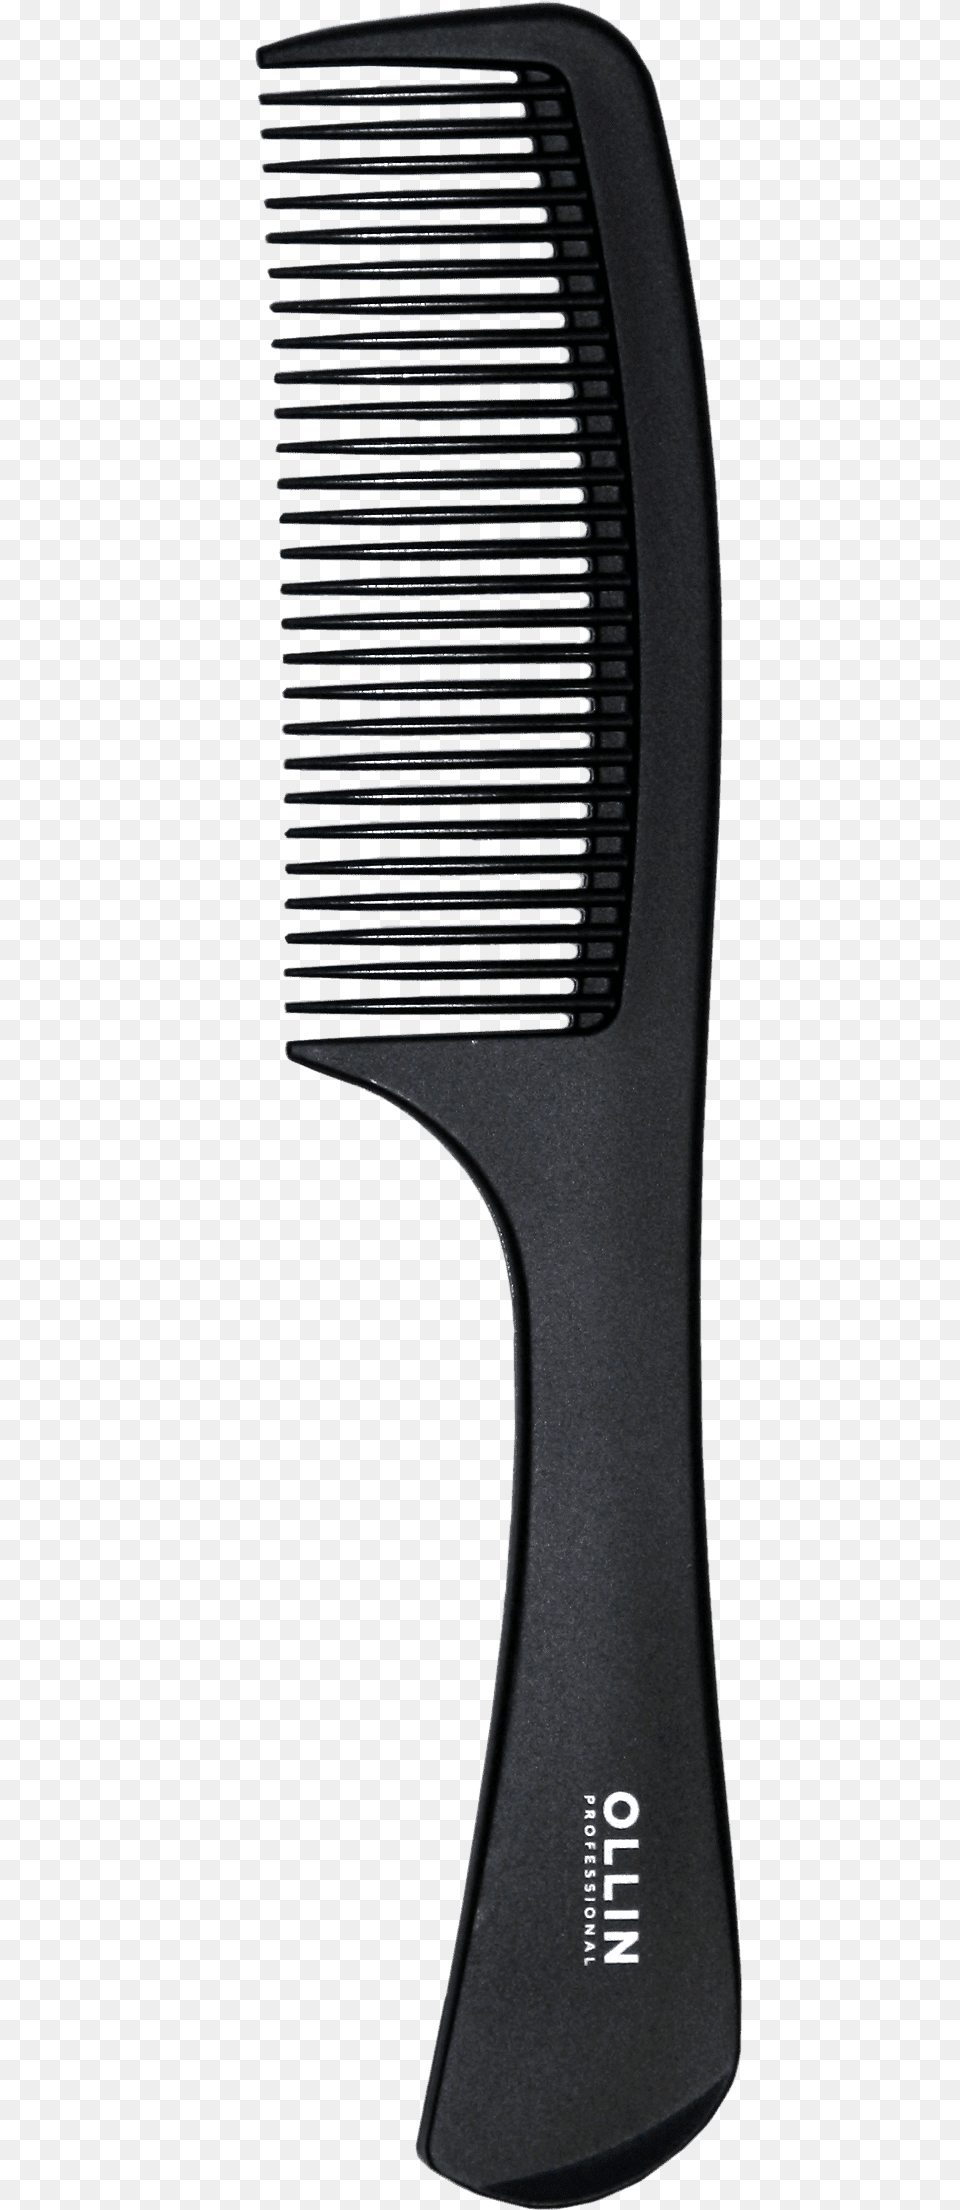 Comb Brush Png Image